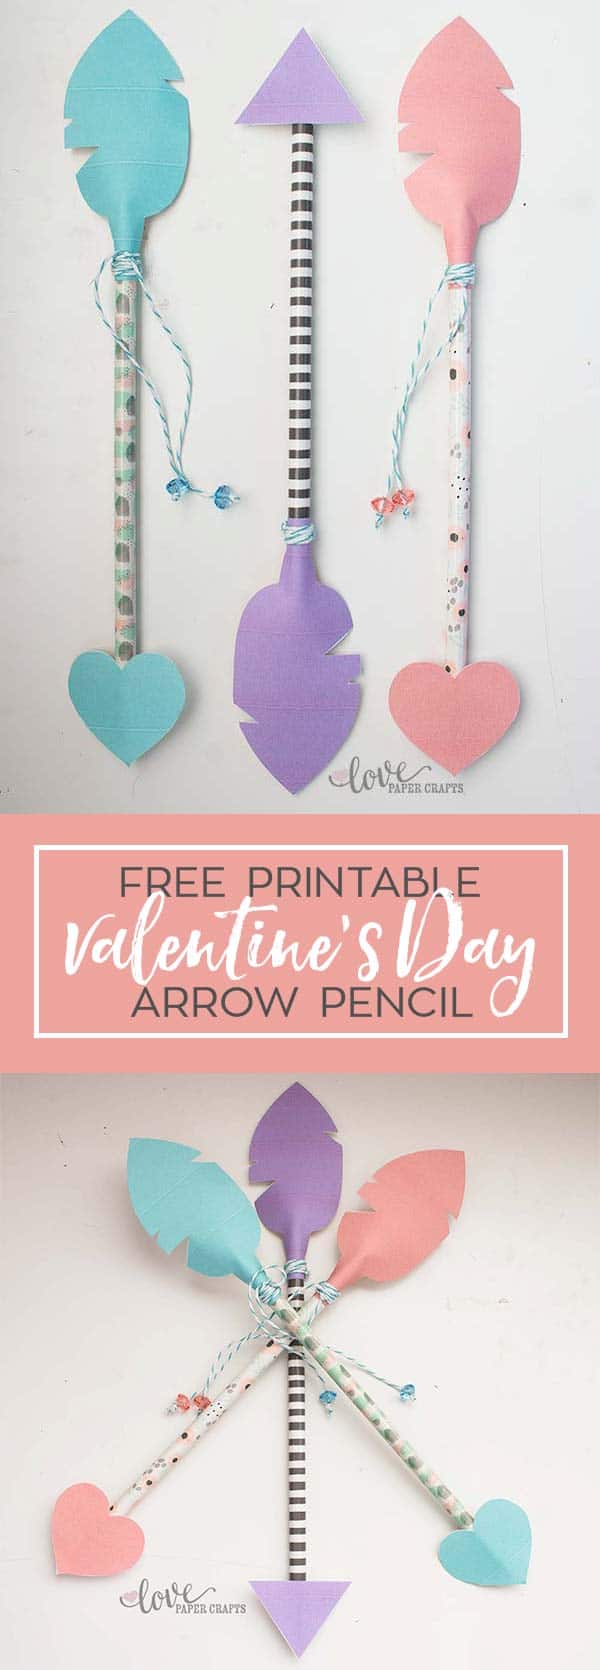 Fun Valentine's Day project for the kids! Valentine's Day pencil arrows free printable and template. Looks easy to make. #ValentinesDay #valentines #kids #arrow | LovePaperCrafts.com